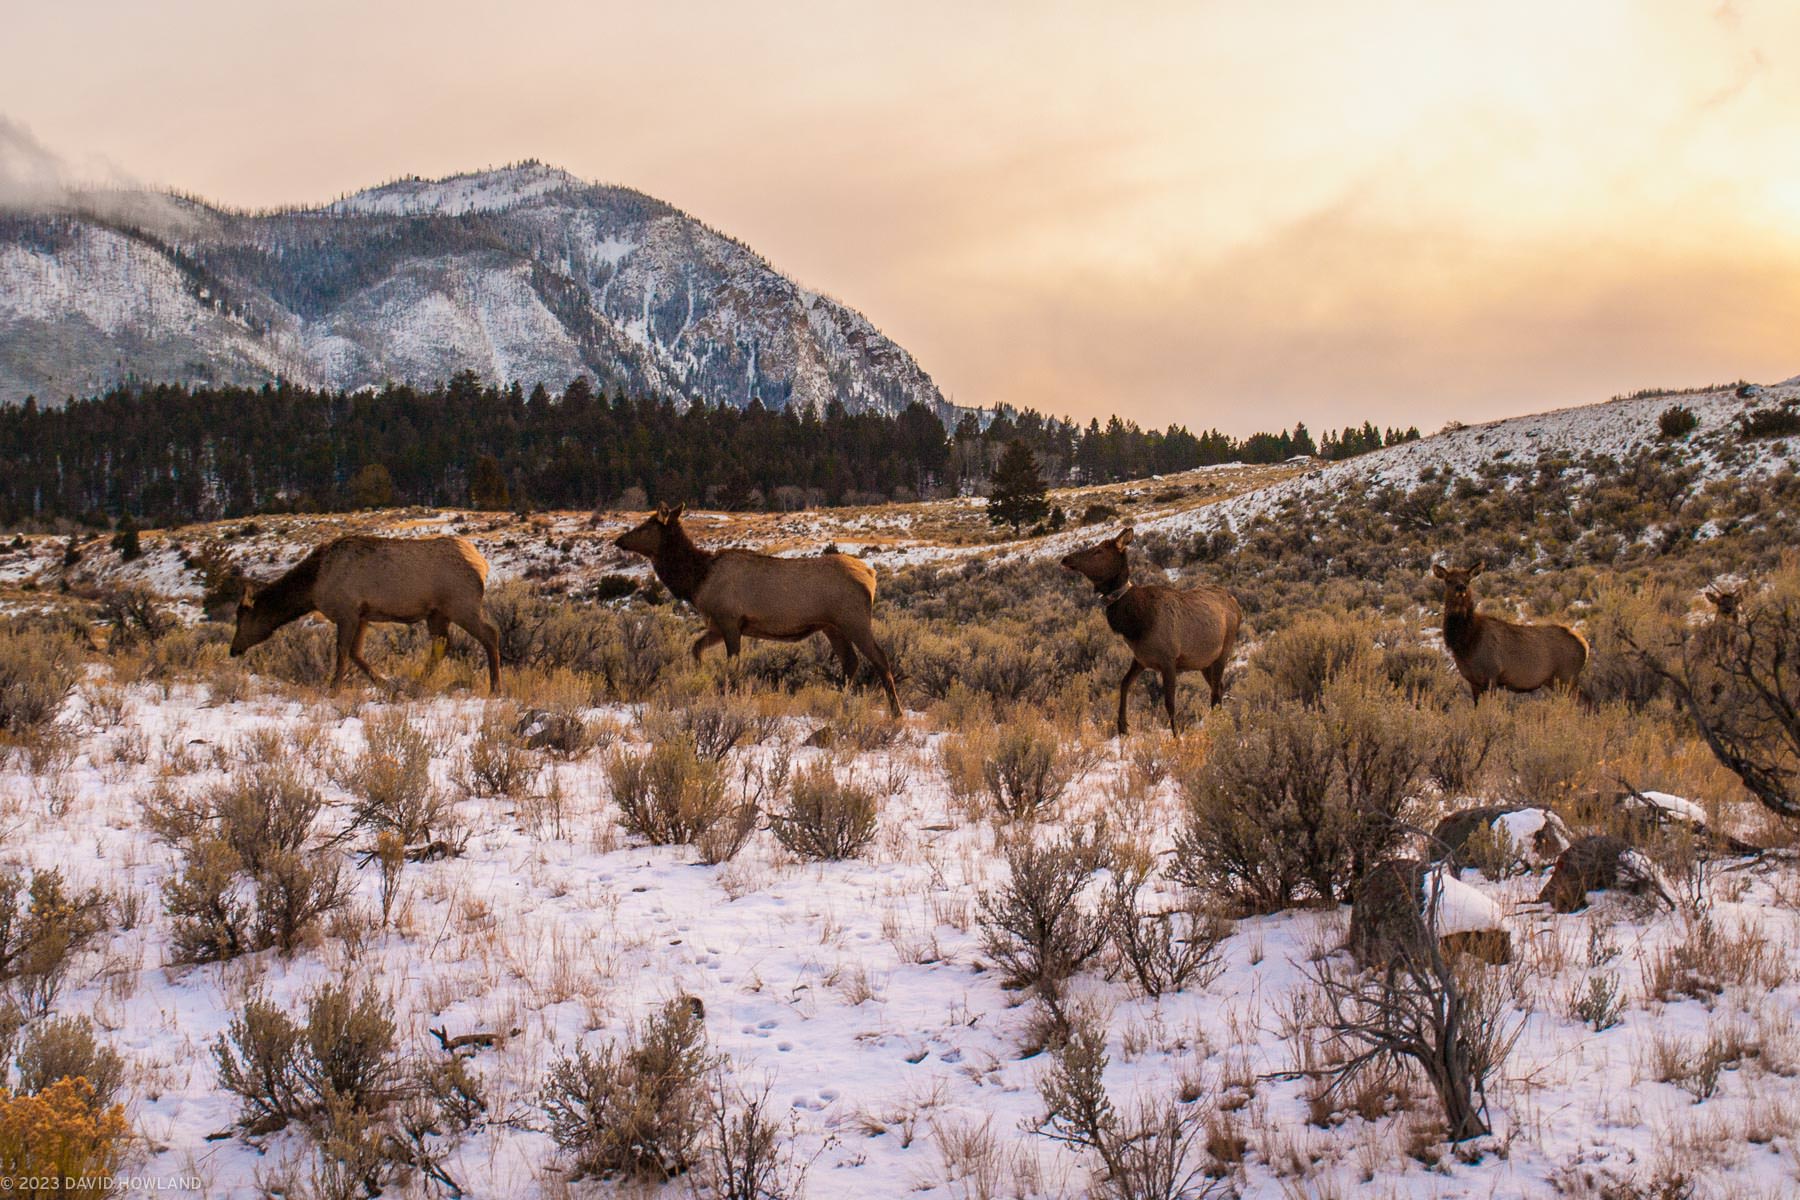 Four elk walk through a snowy landscape at sunset in Yellowstone National Park.